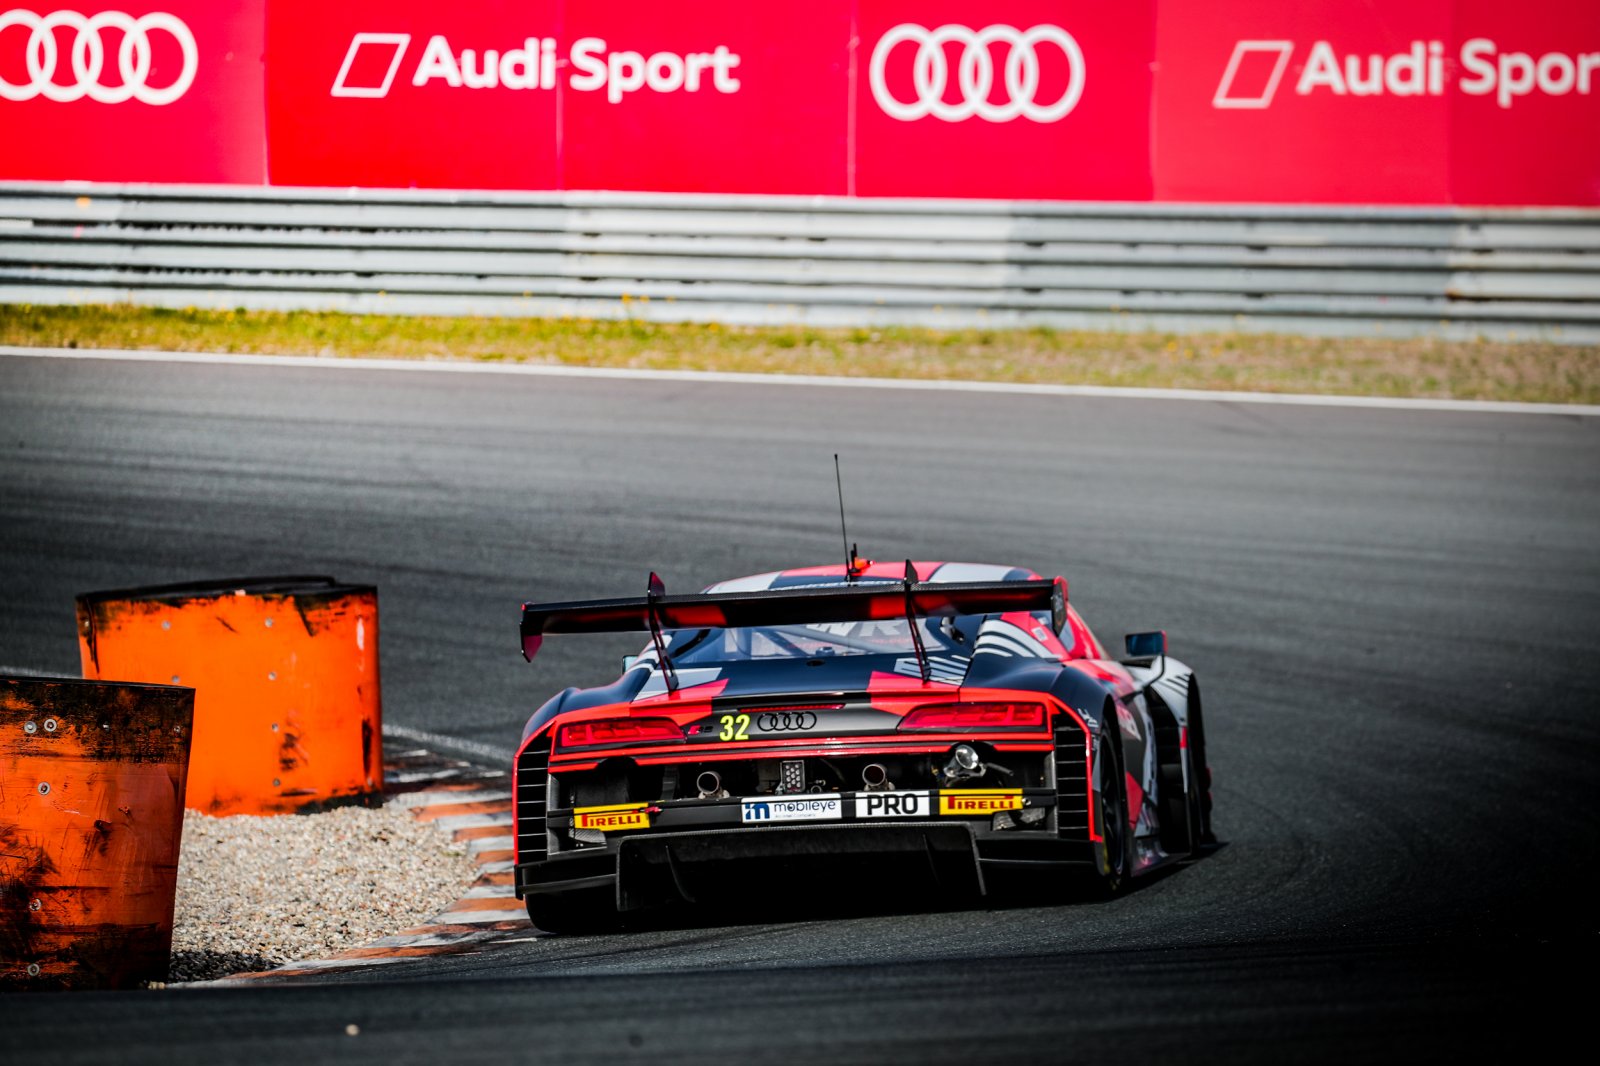 Weerts bags pole for Team WRT to lead Audi front-row lockout at Zandvoort